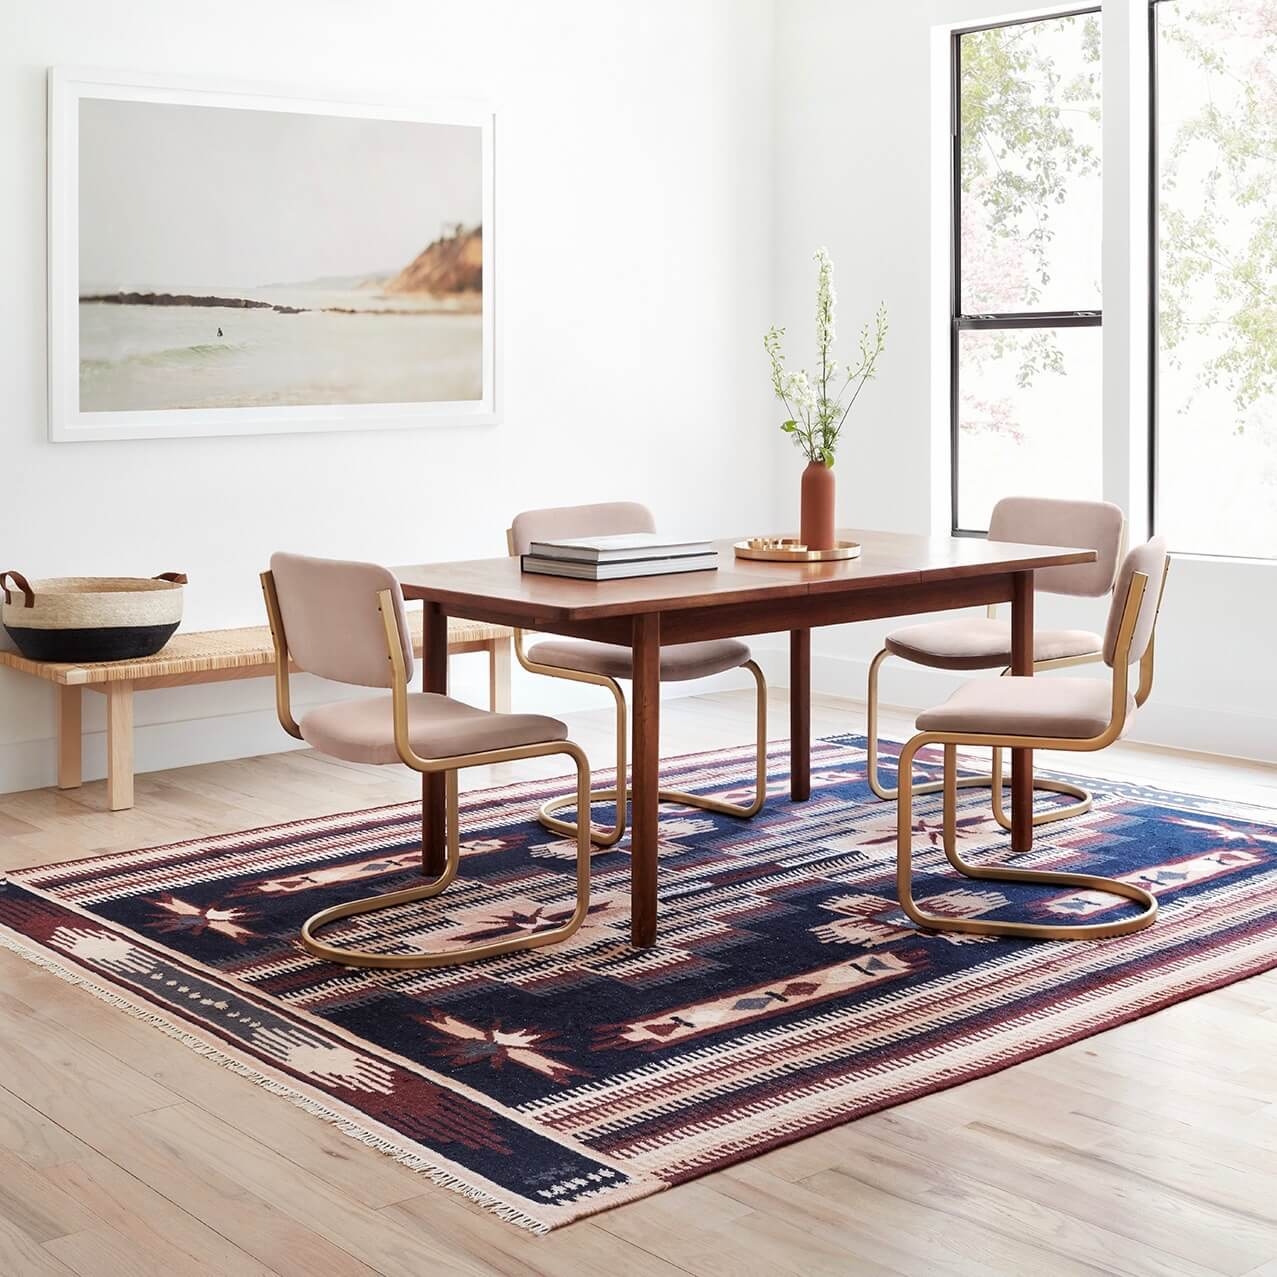 The Citizenry Keya Handwoven Area Rug | 6' x 9' | Made You Blush - Image 1